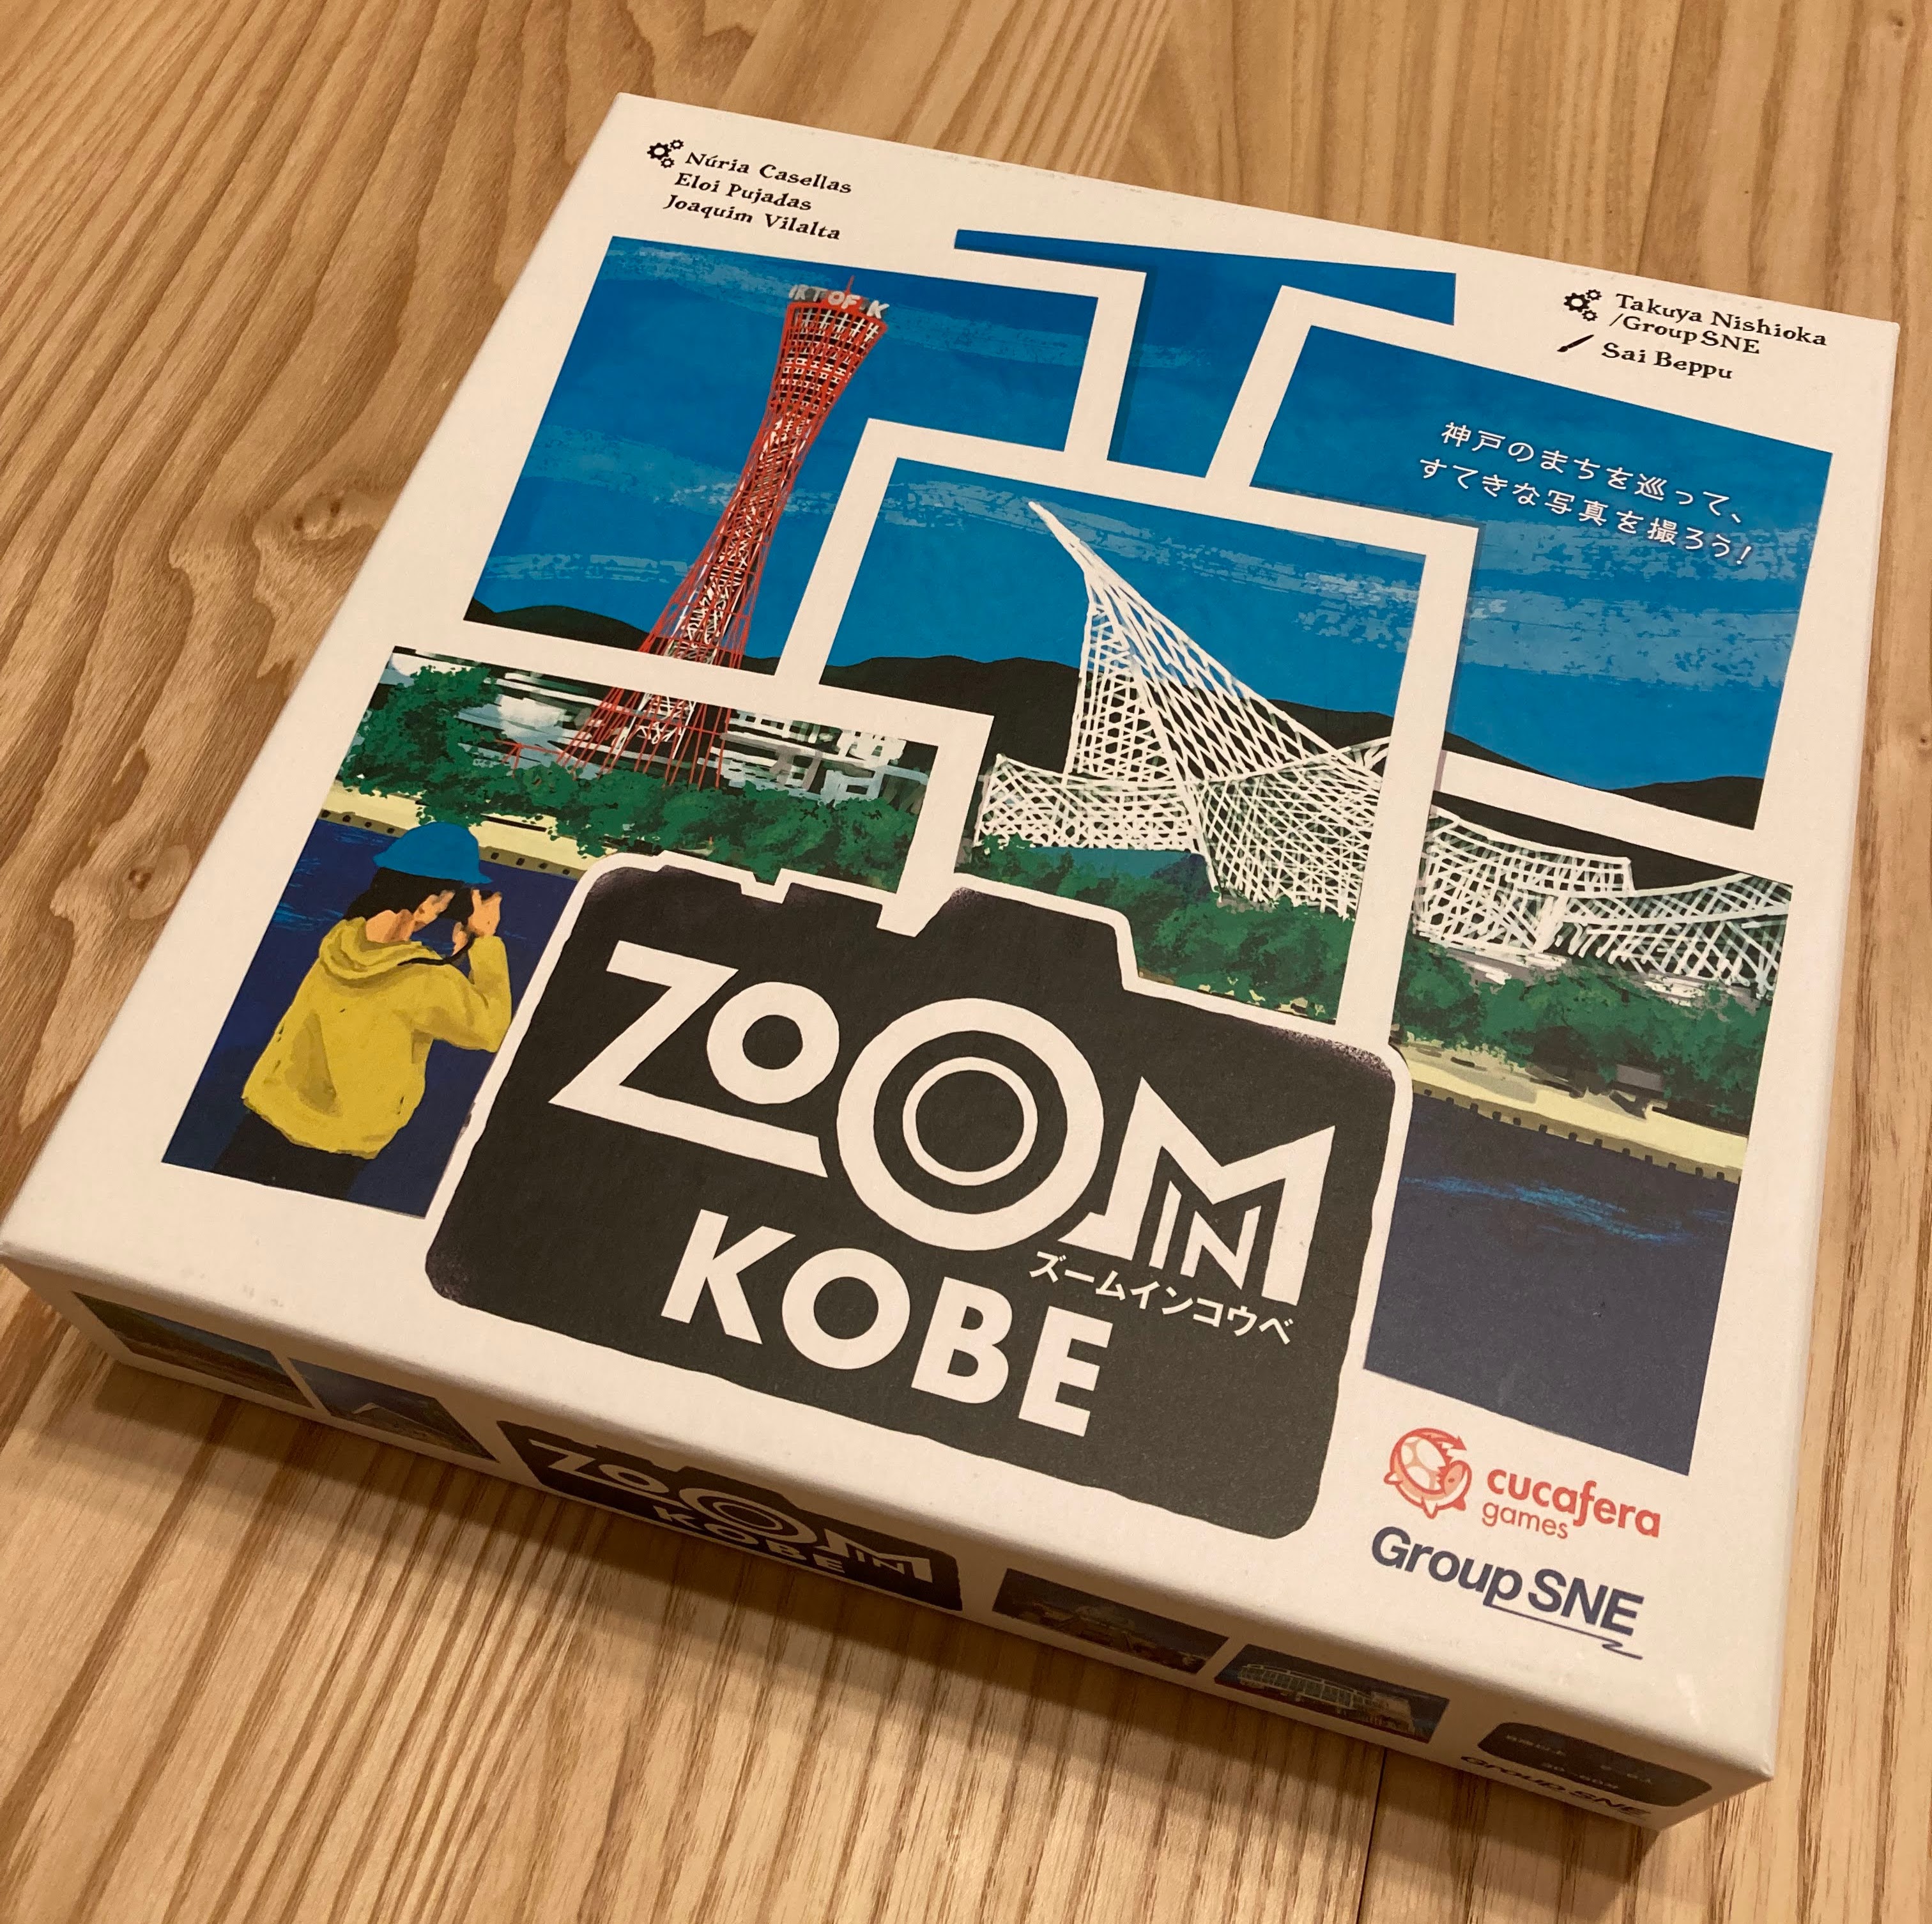 Box of board game "Zoom in Kyoto"